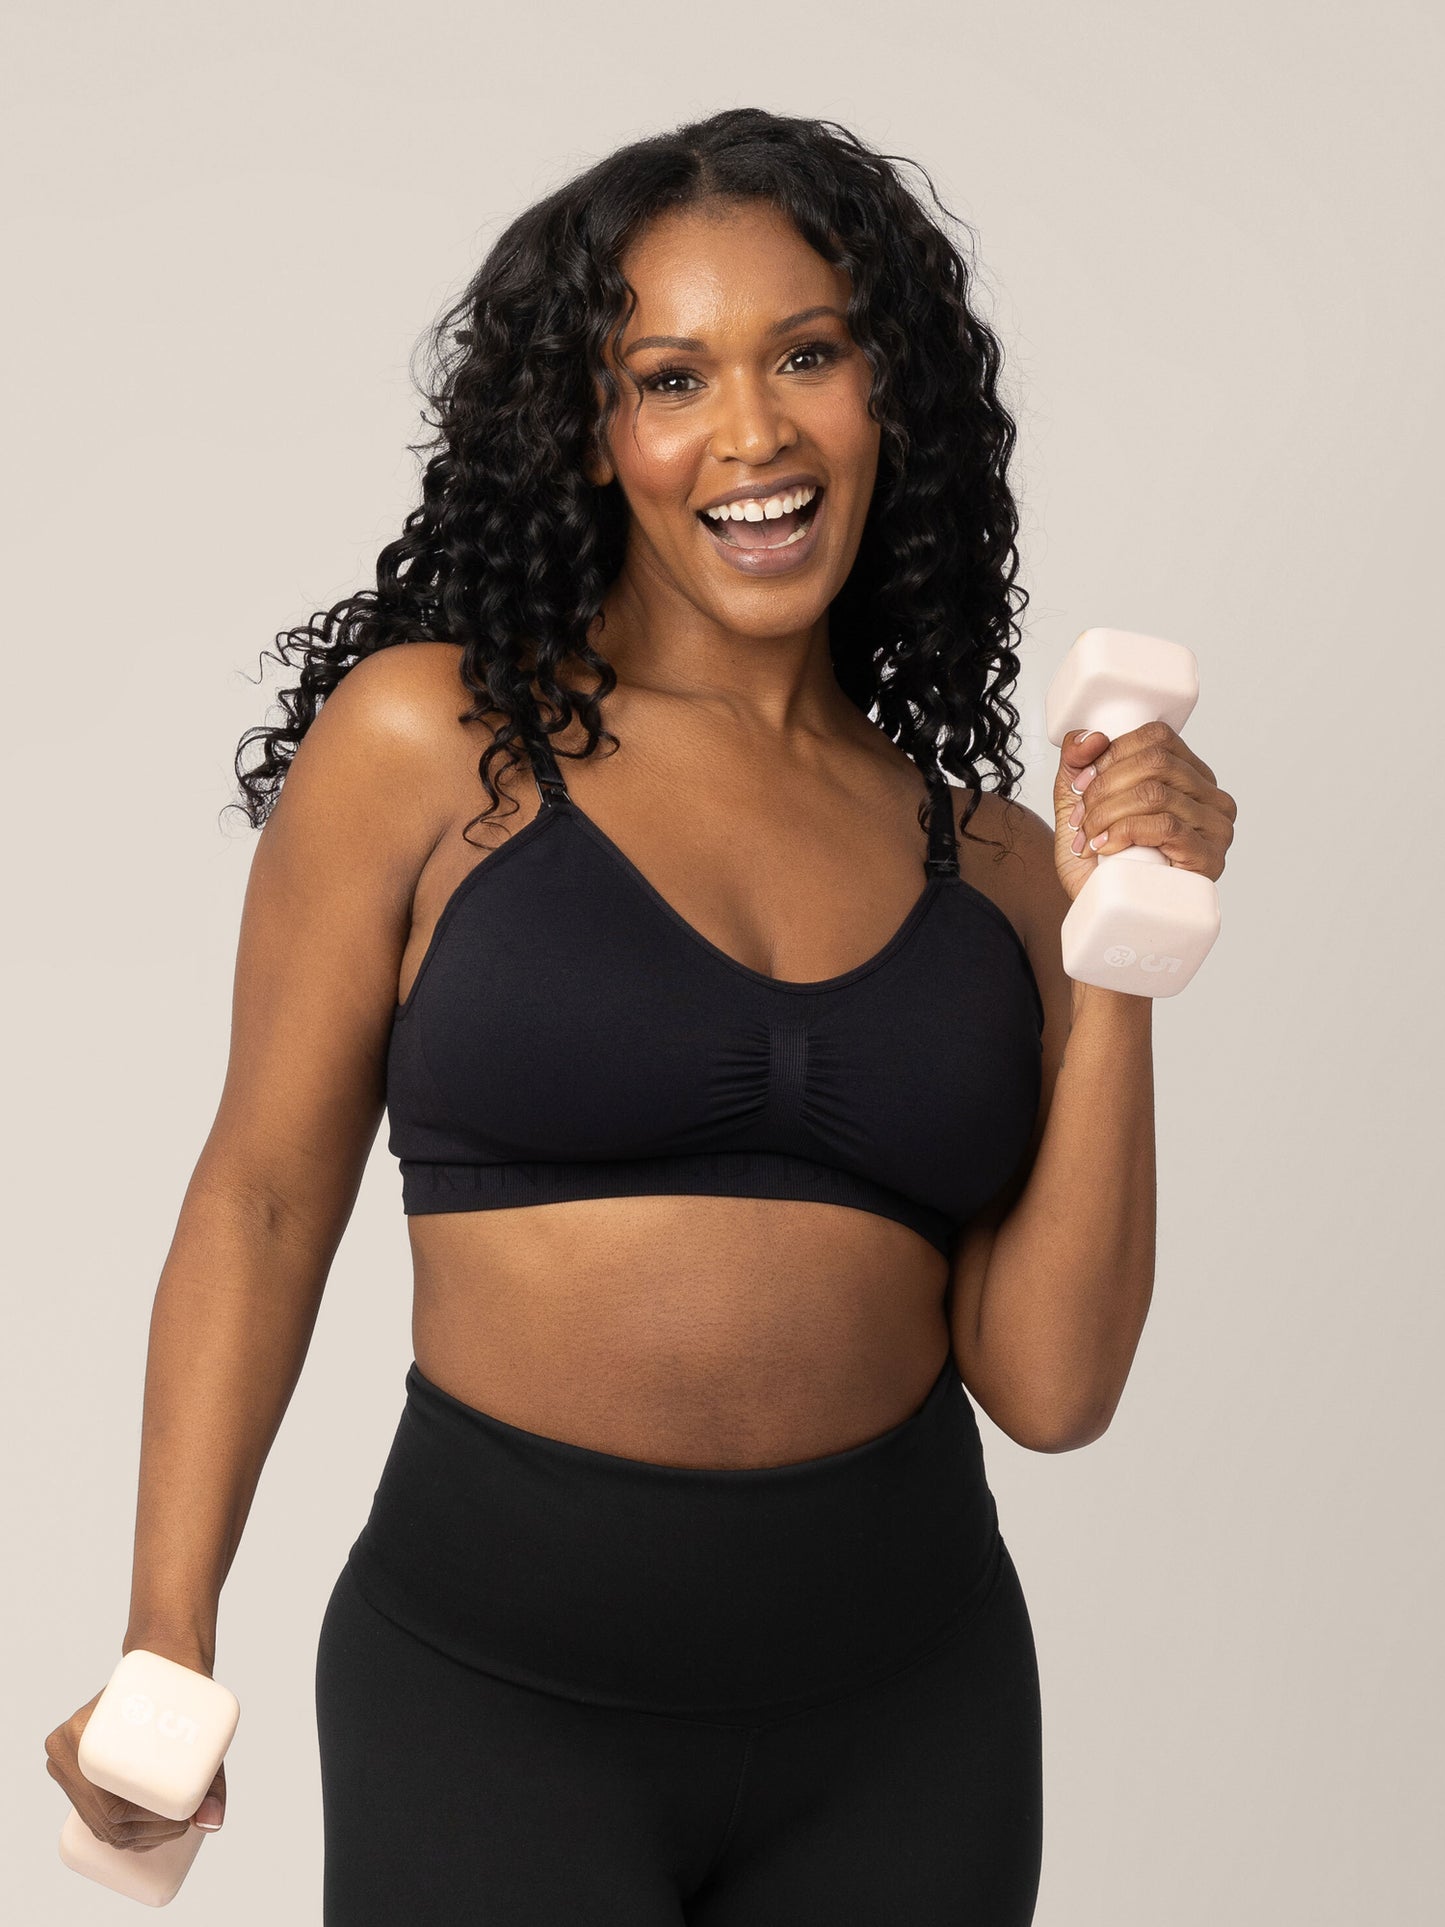 Kindred Bravely Plus Size Busty Sublime Nursing Sports Bra S in